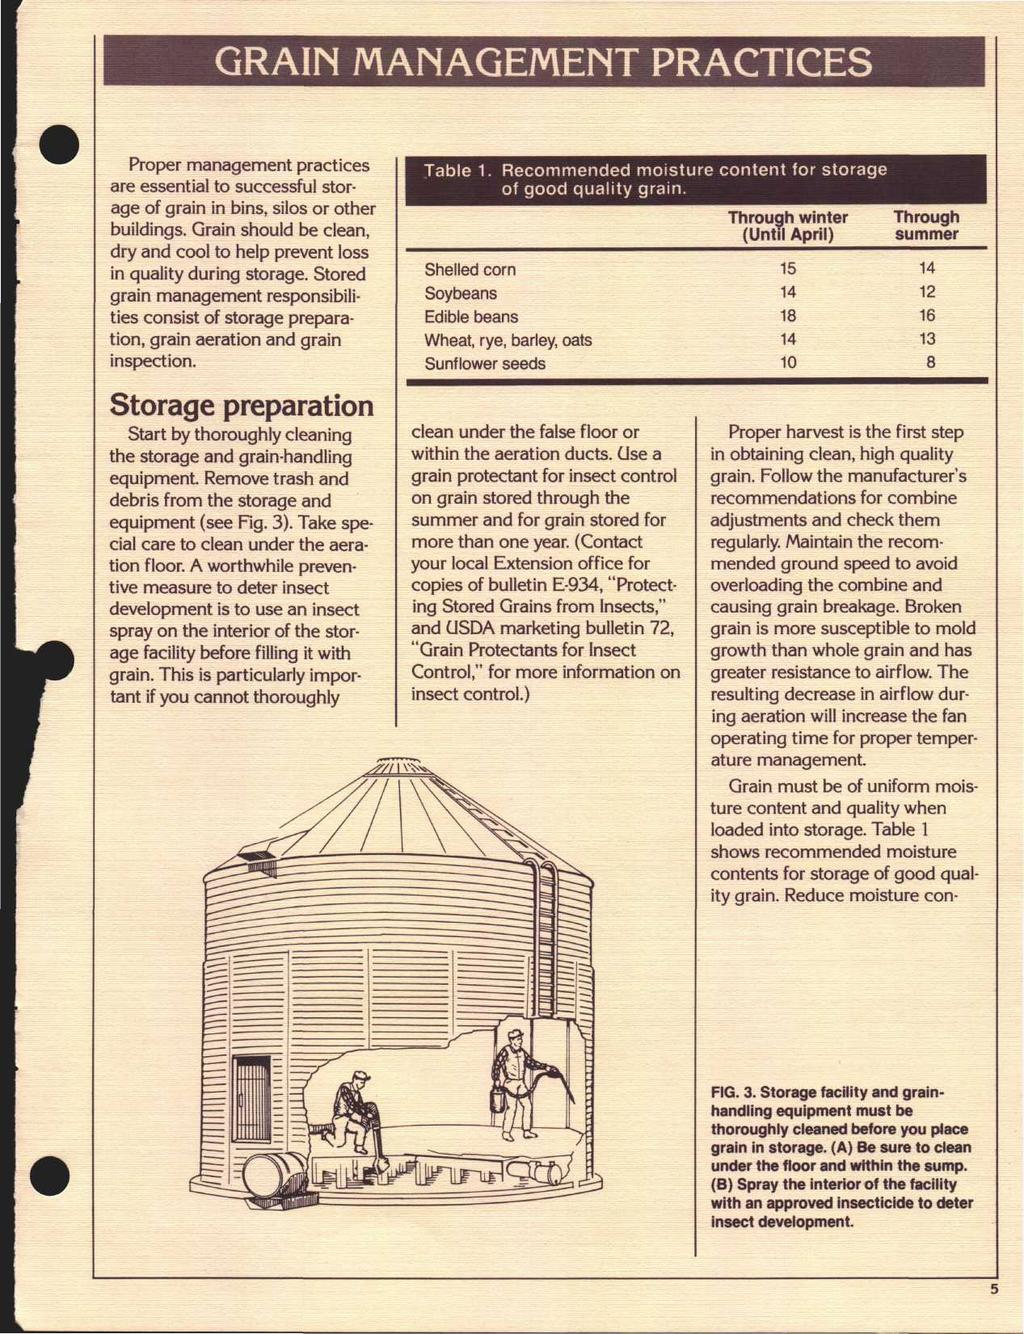 GRAIN MANAGEMENT PRACTICES Proper management practices are essential to successful storage of grain in bins, silos or other buildings.